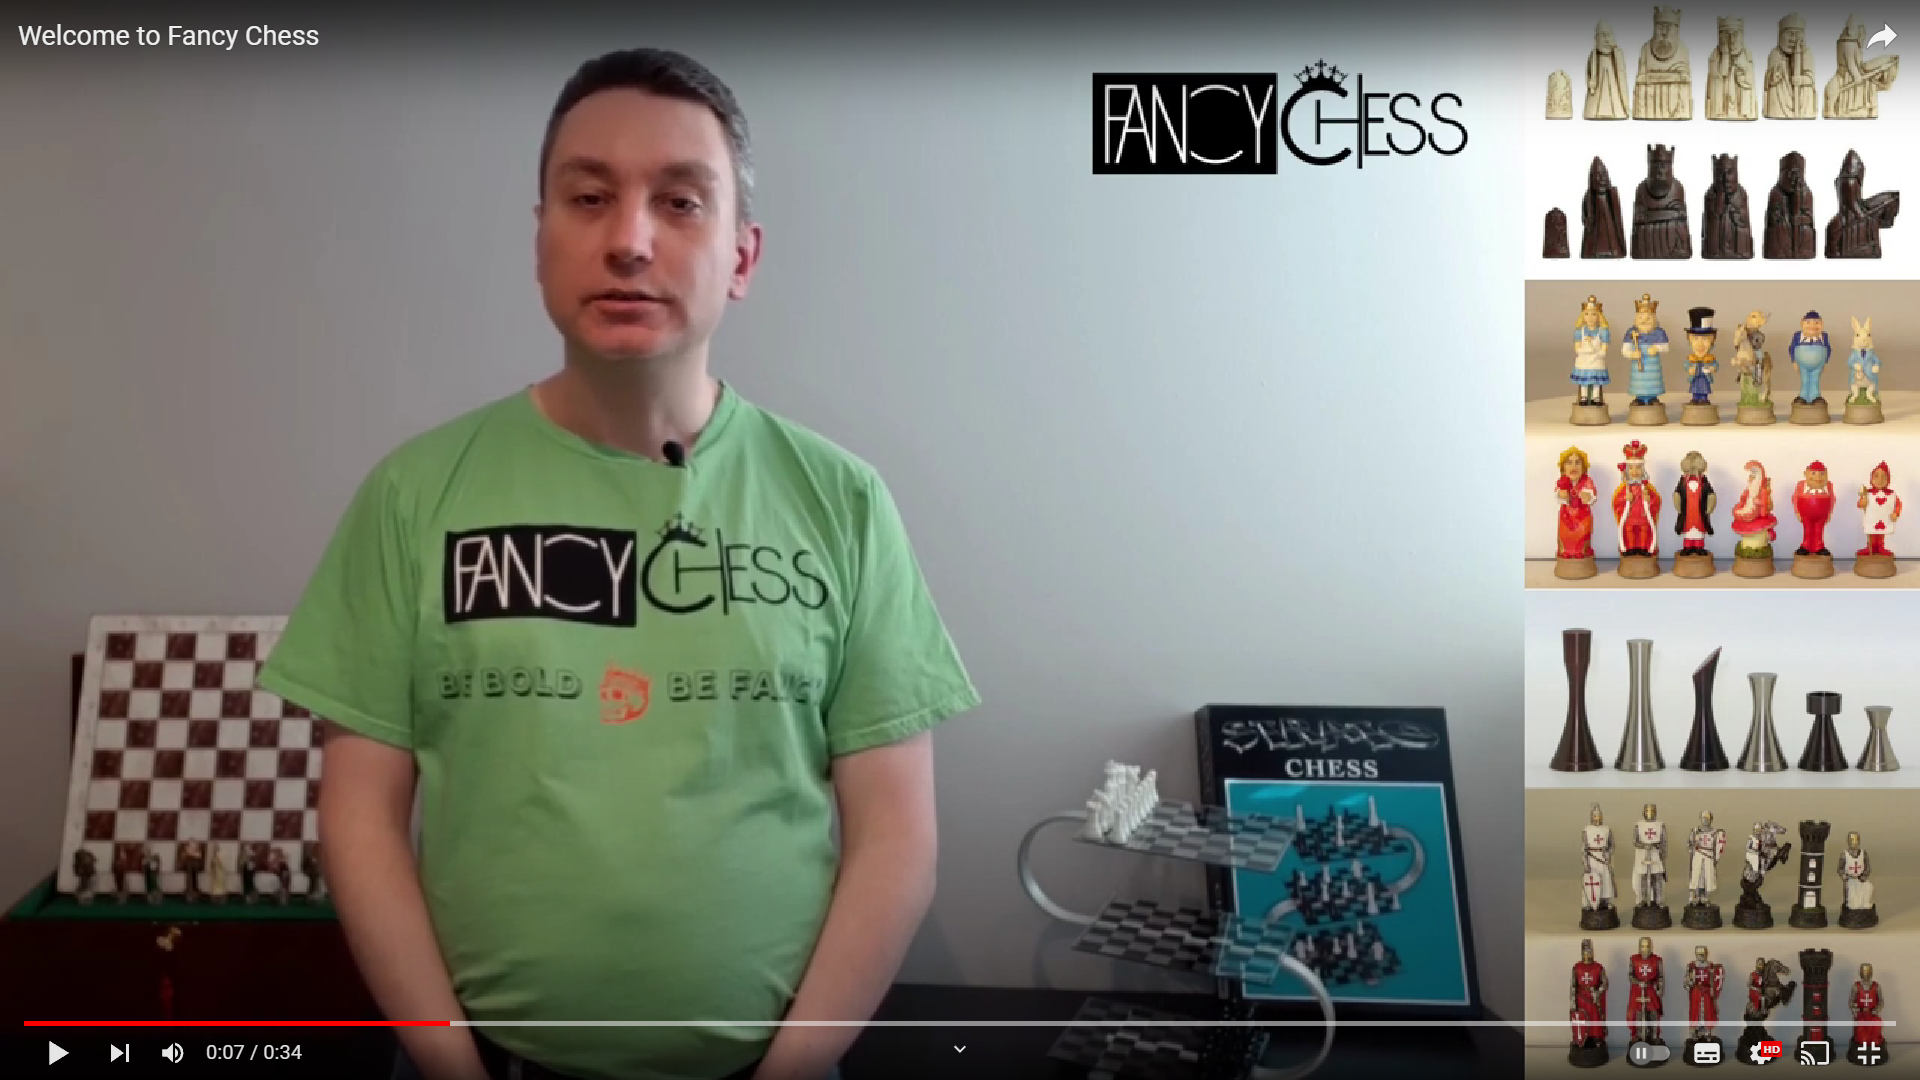 Load video: Welcome to Fancy Chess